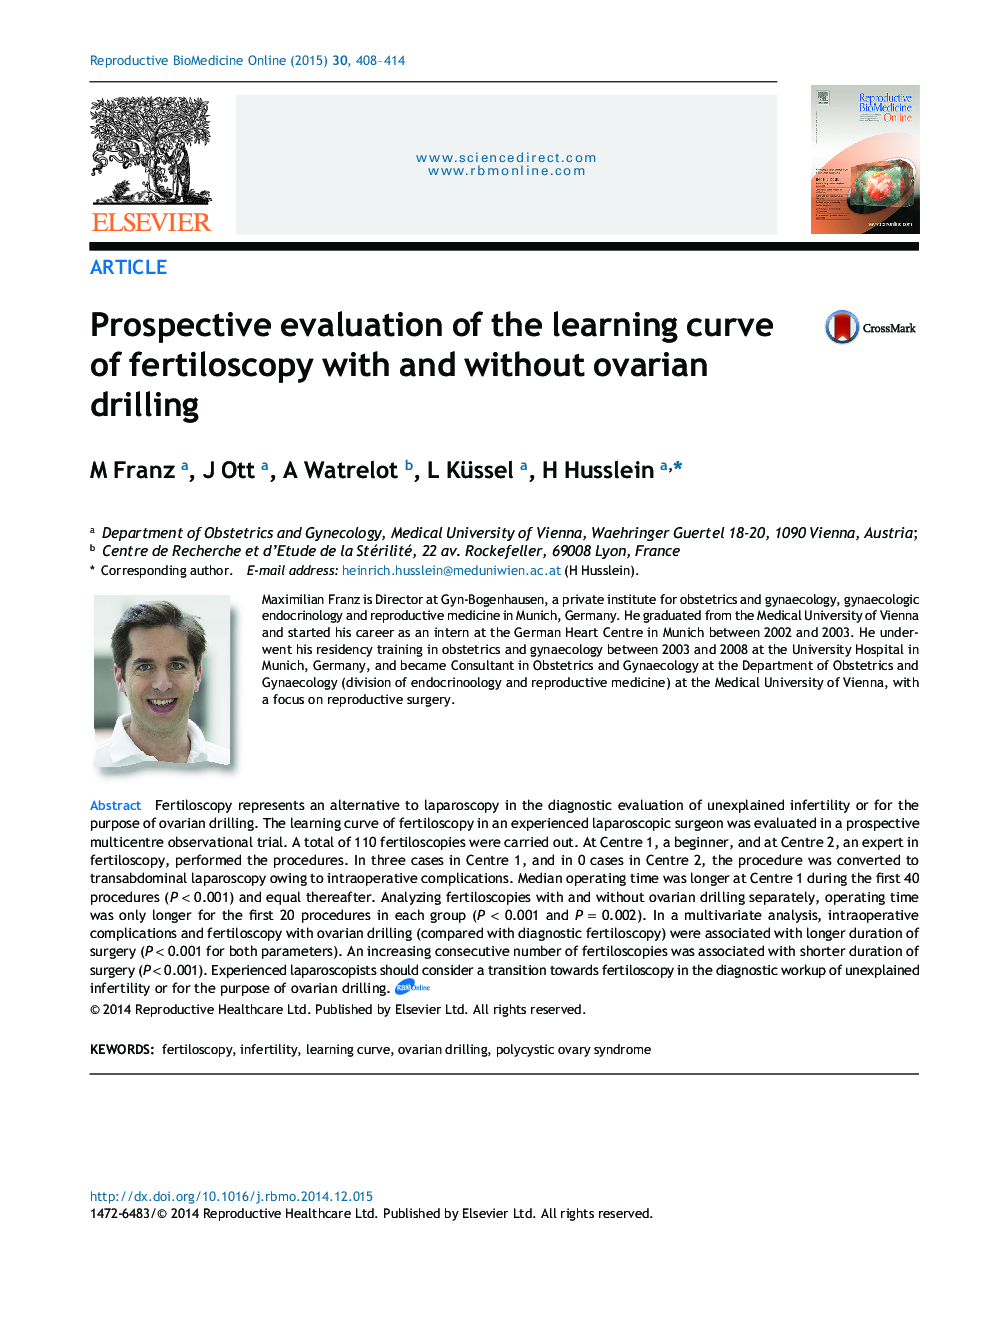 Prospective evaluation of the learning curve of fertiloscopy with and without ovarian drilling